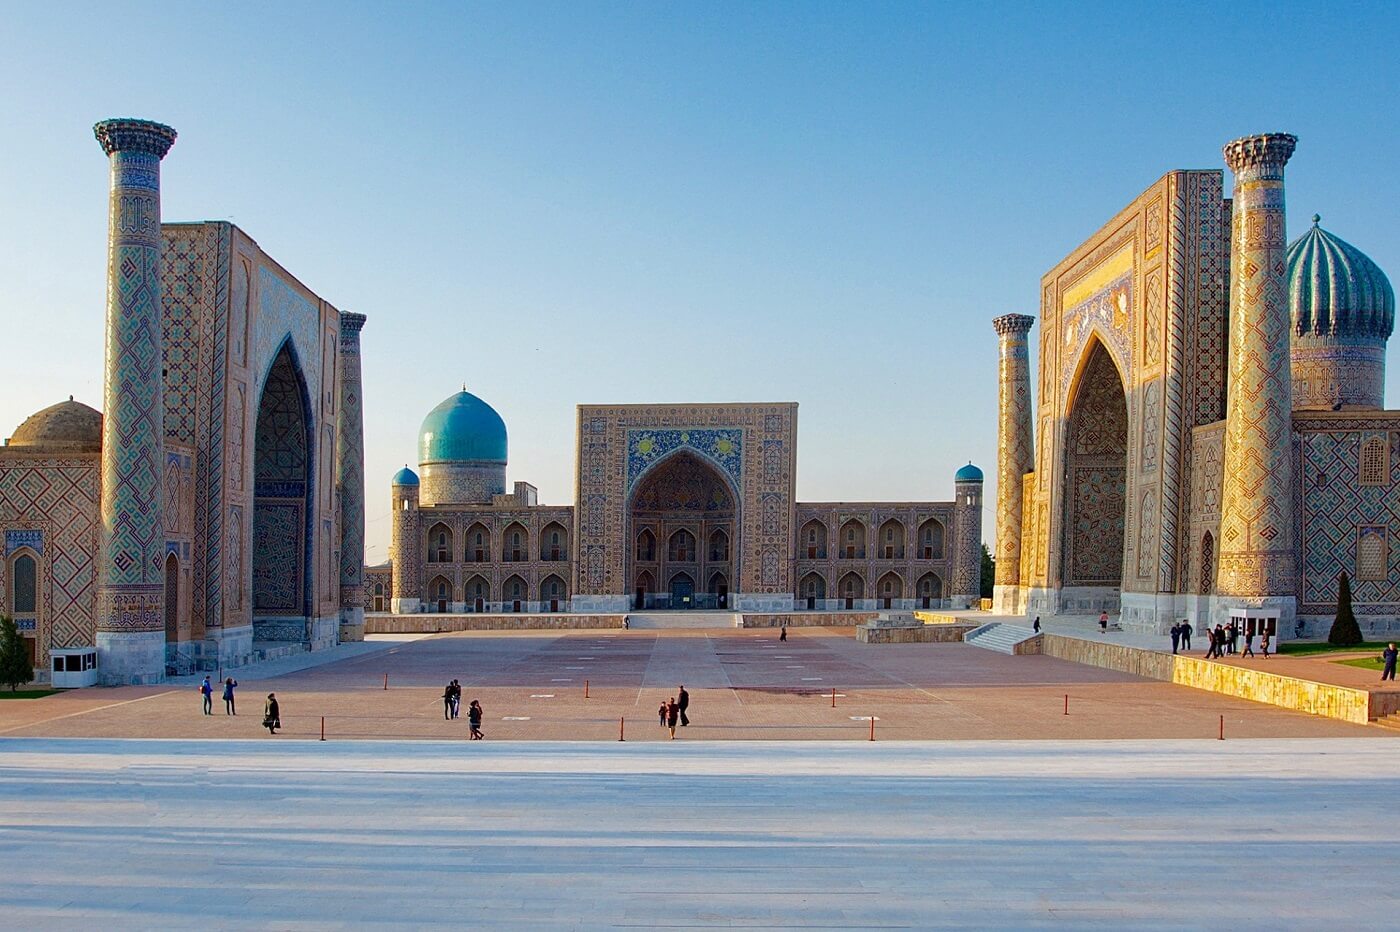 Registan with three madrasahs and mosque, the central square in Samarkand